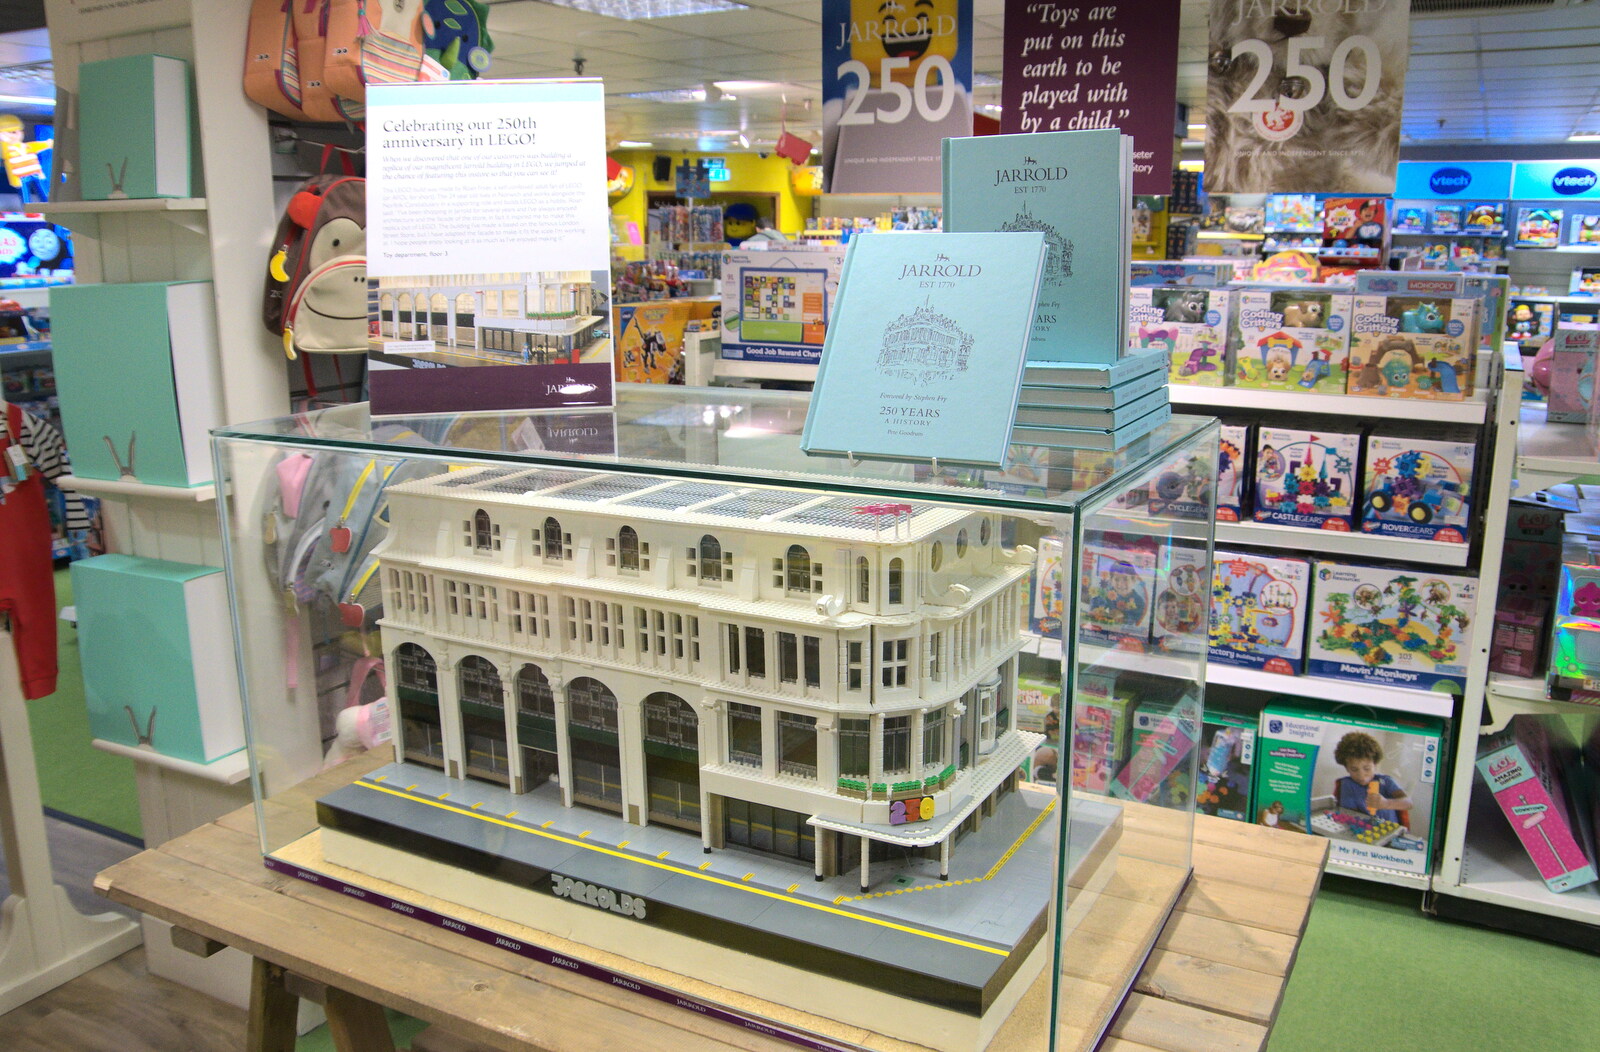 There's a Lego model of Jarrold's department store from A Trip to Cooke's Music, St. Benedict's Street, Norwich - 14th March 2020